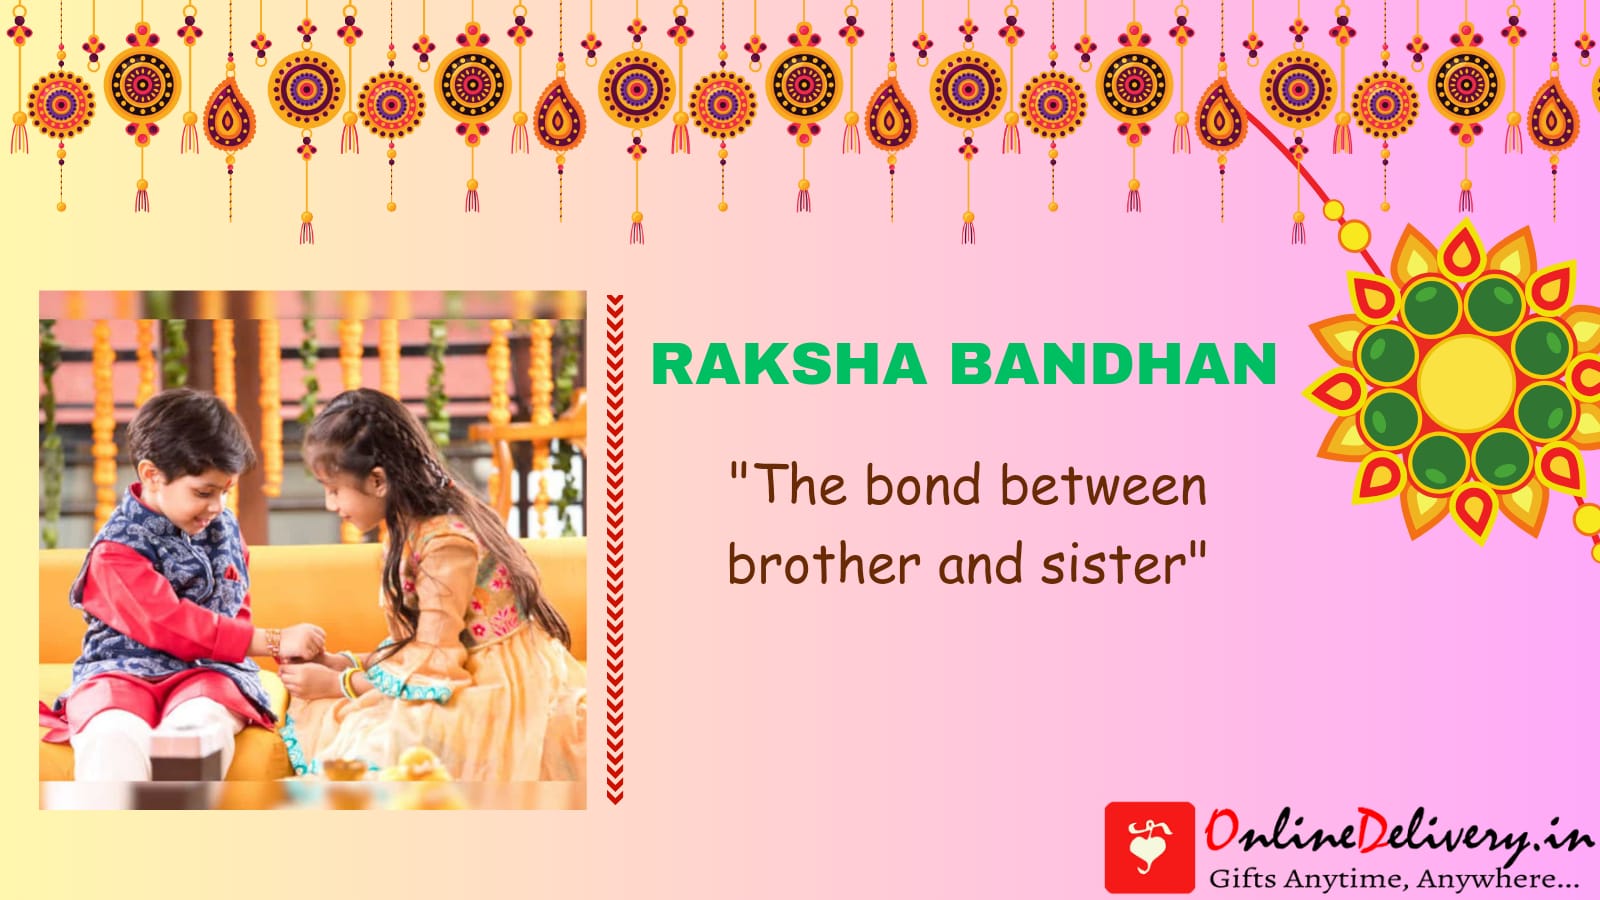 Raksha Bandhan Quotes, Messages & Wishes For Siblings